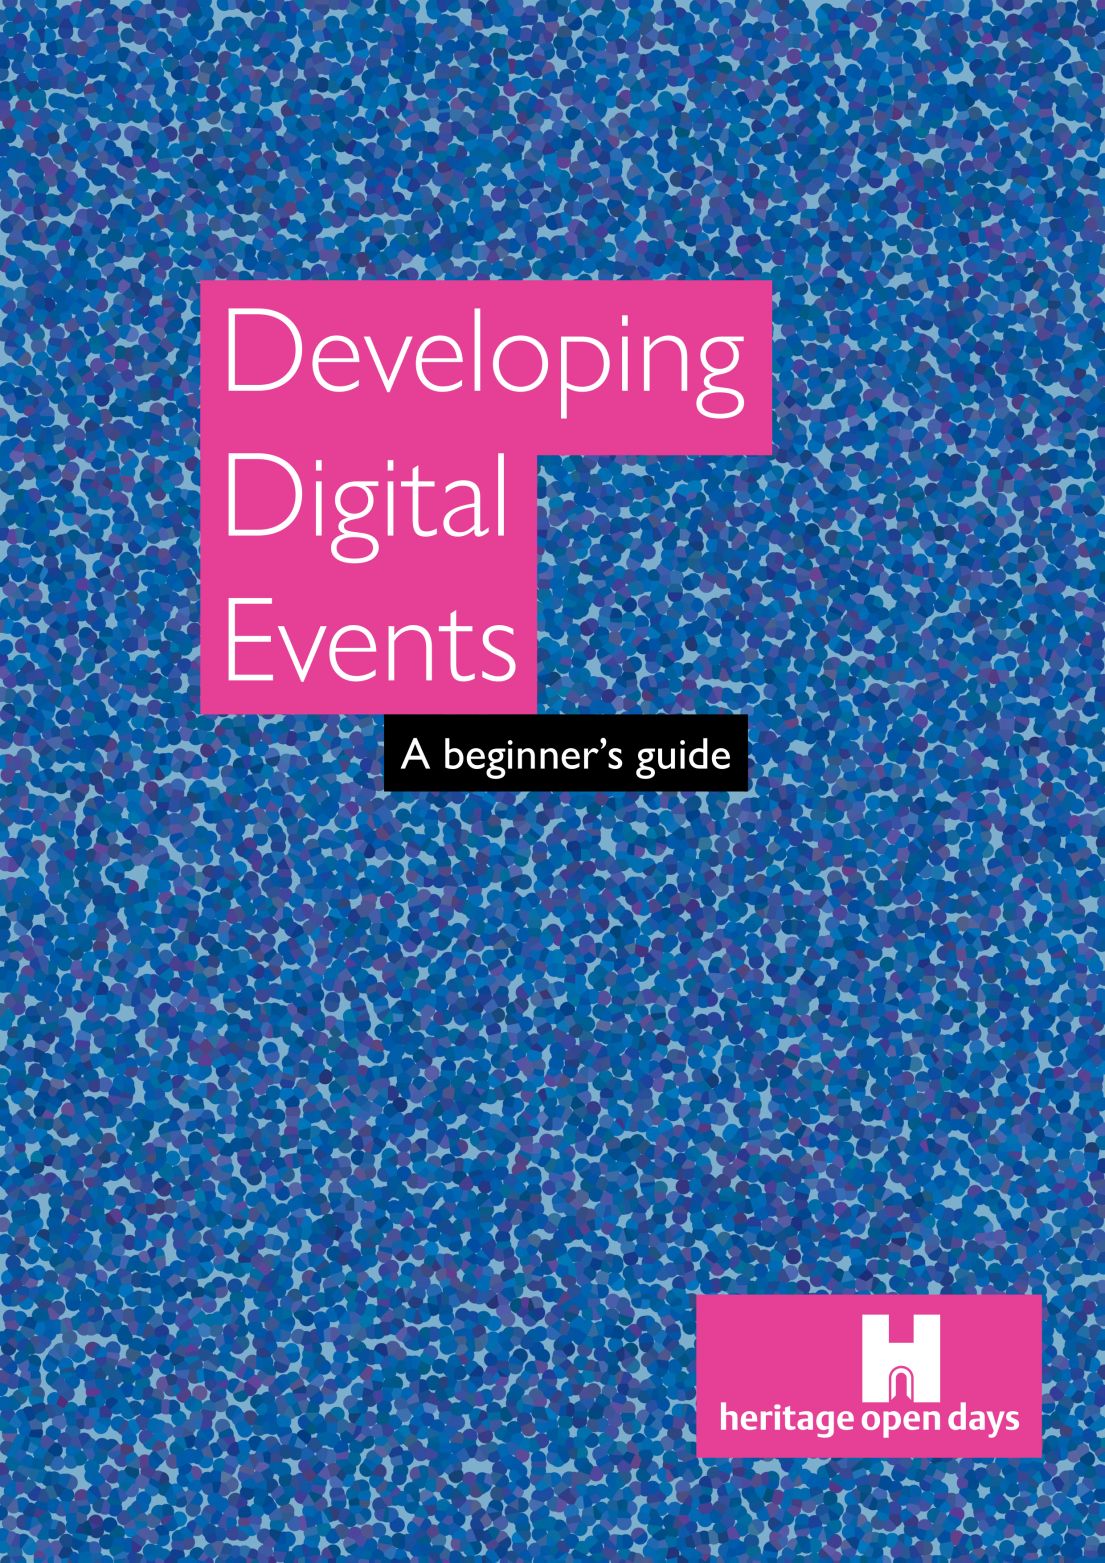 Developing digital events guide front cover